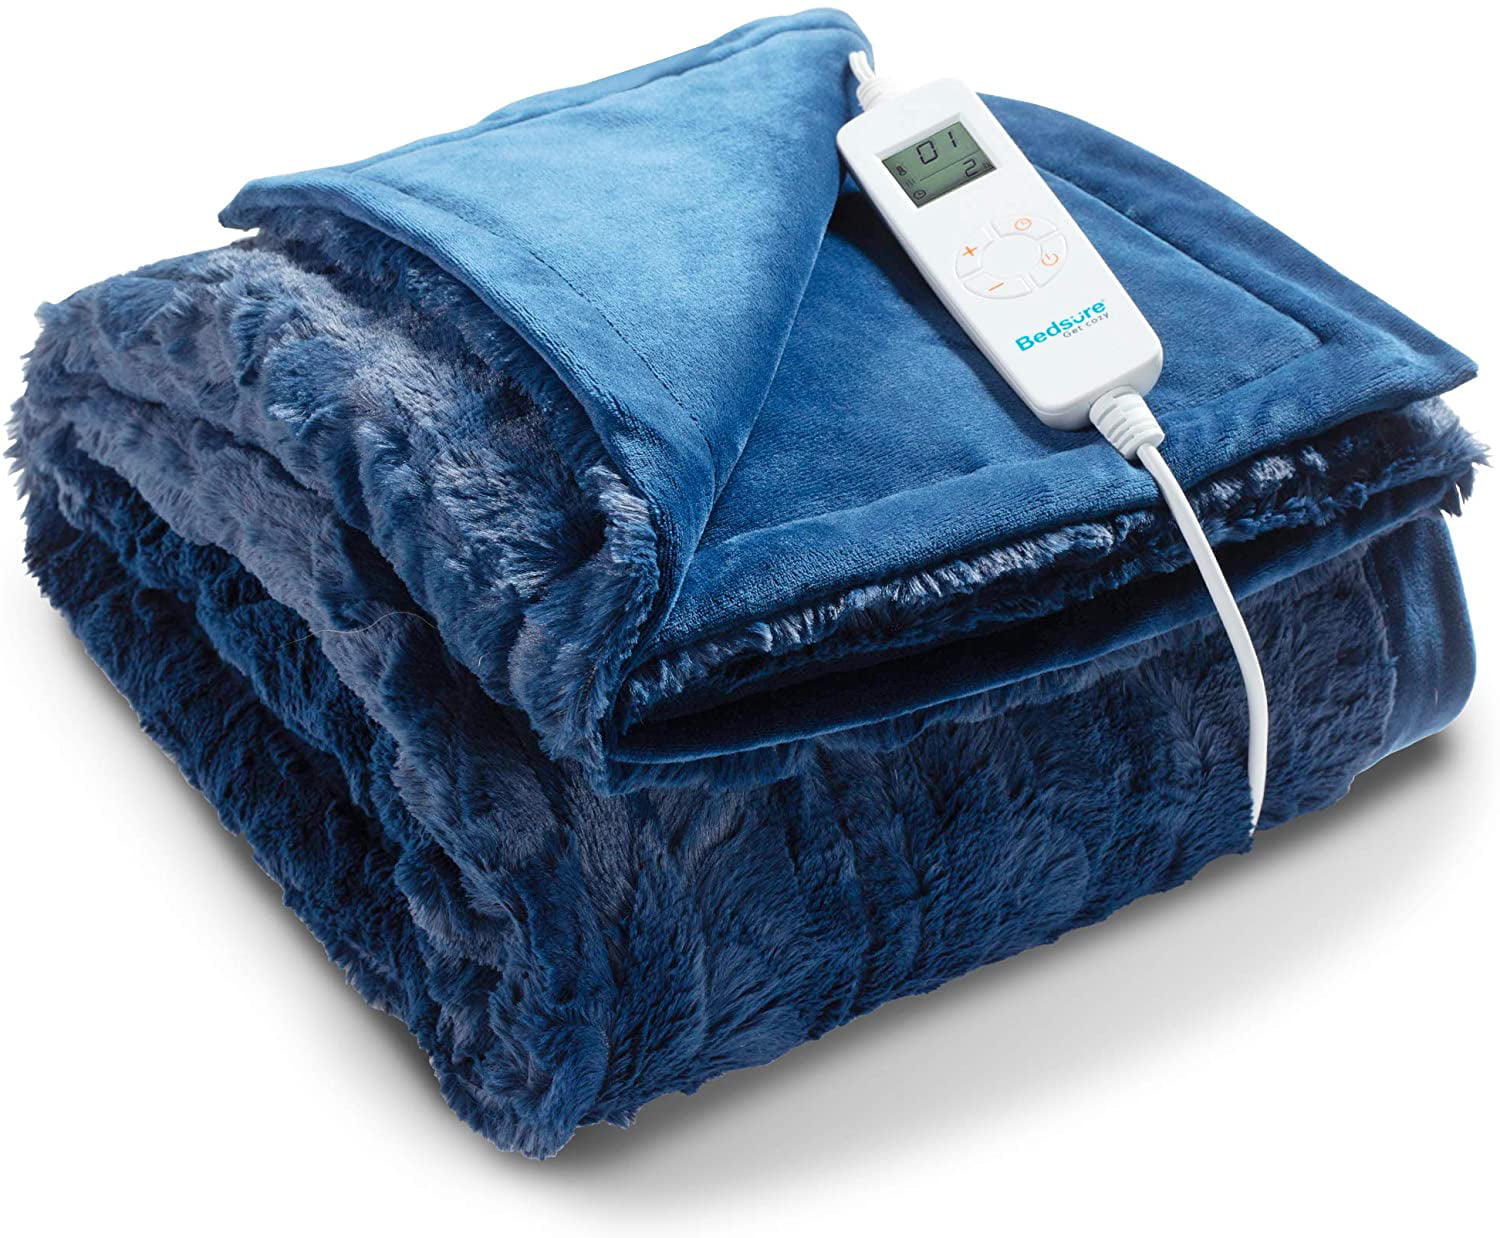 Bedsure Heated Blanket Throw Electric - with 6 Heat Setting, Fast - Heating  Blanket 1/2/3/4 H Timer, Auto - Off, Low Voltage Fuzzy Super Soft Flannel  